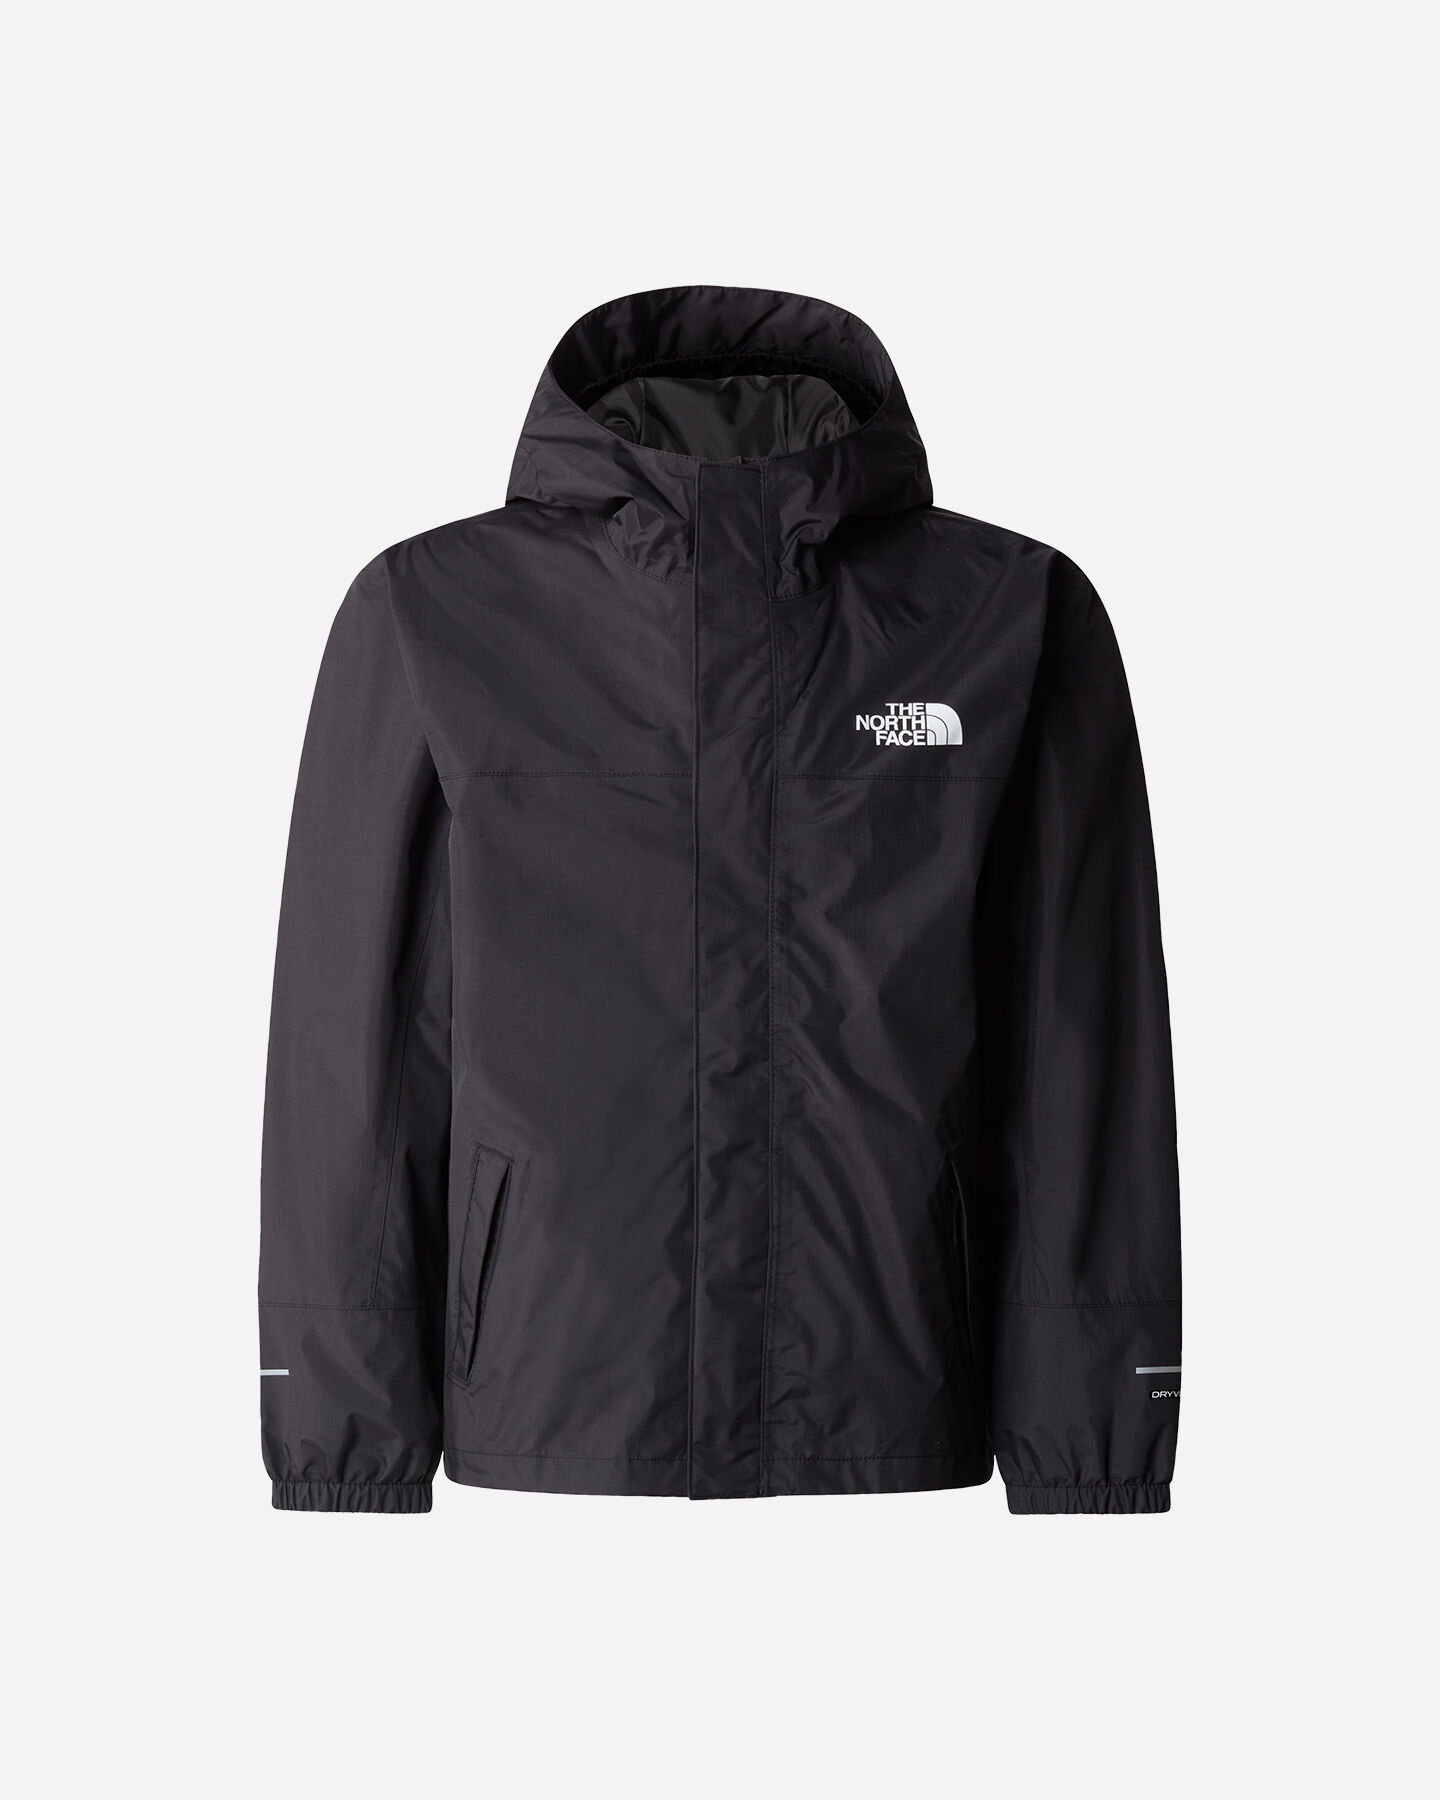  Giacca outdoor THE NORTH FACE ANTORA RAIN JR S5651427|JK3|M scatto 0